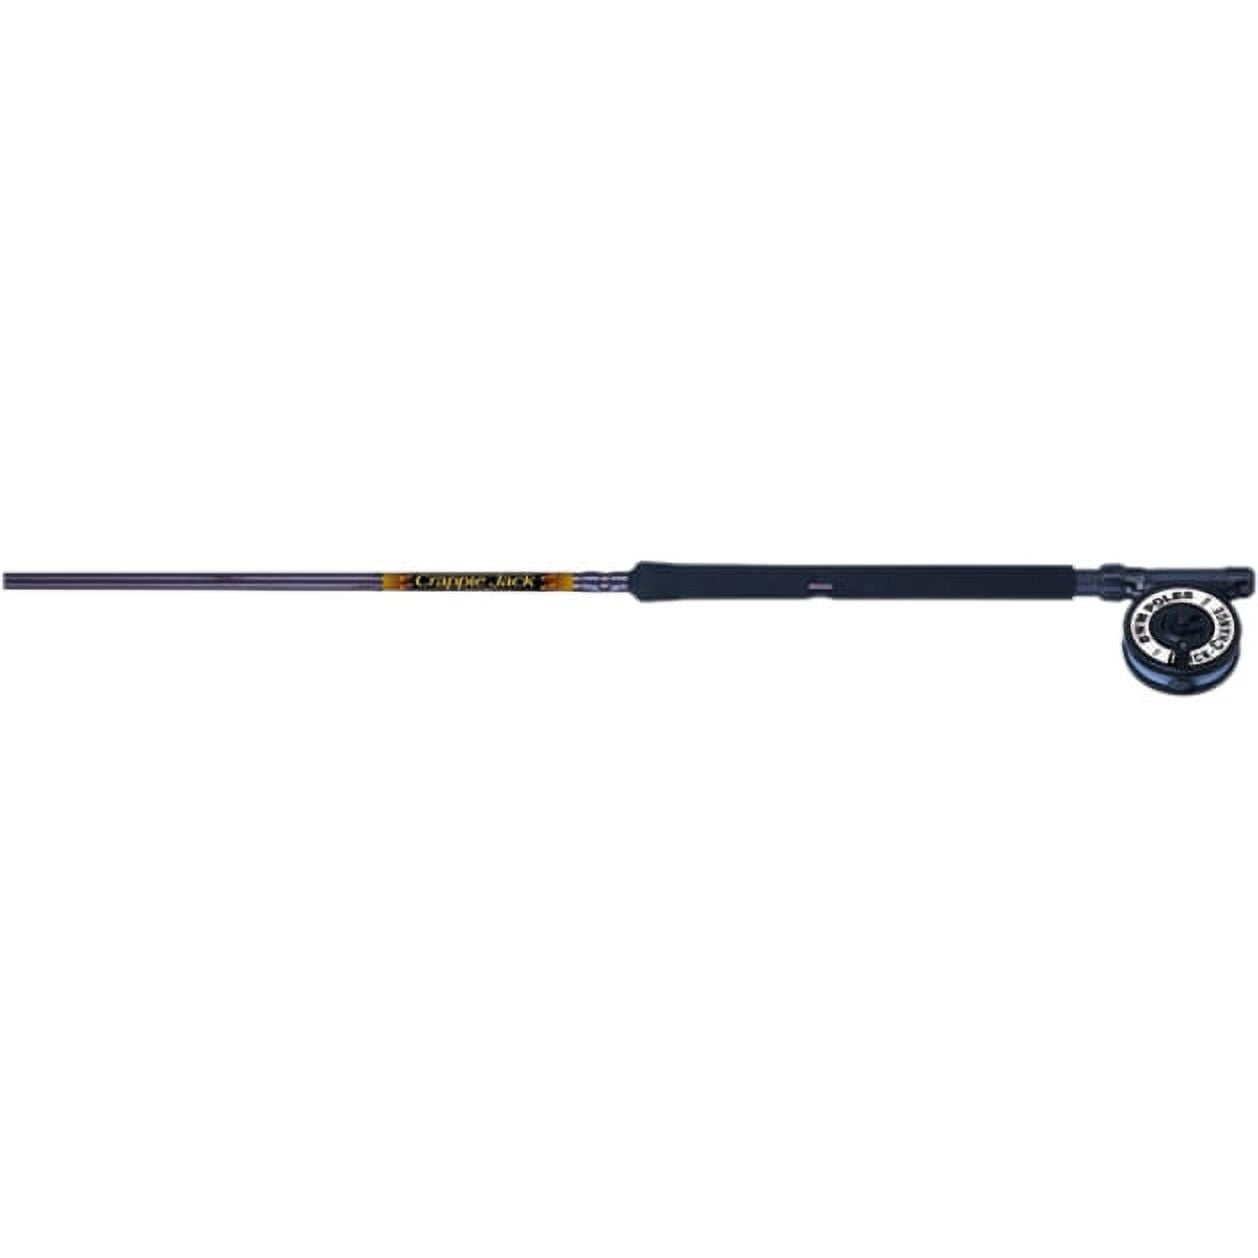 B'N'M Crappie Jack Fishing Rod and Reel Combo, 9', 2-Piece